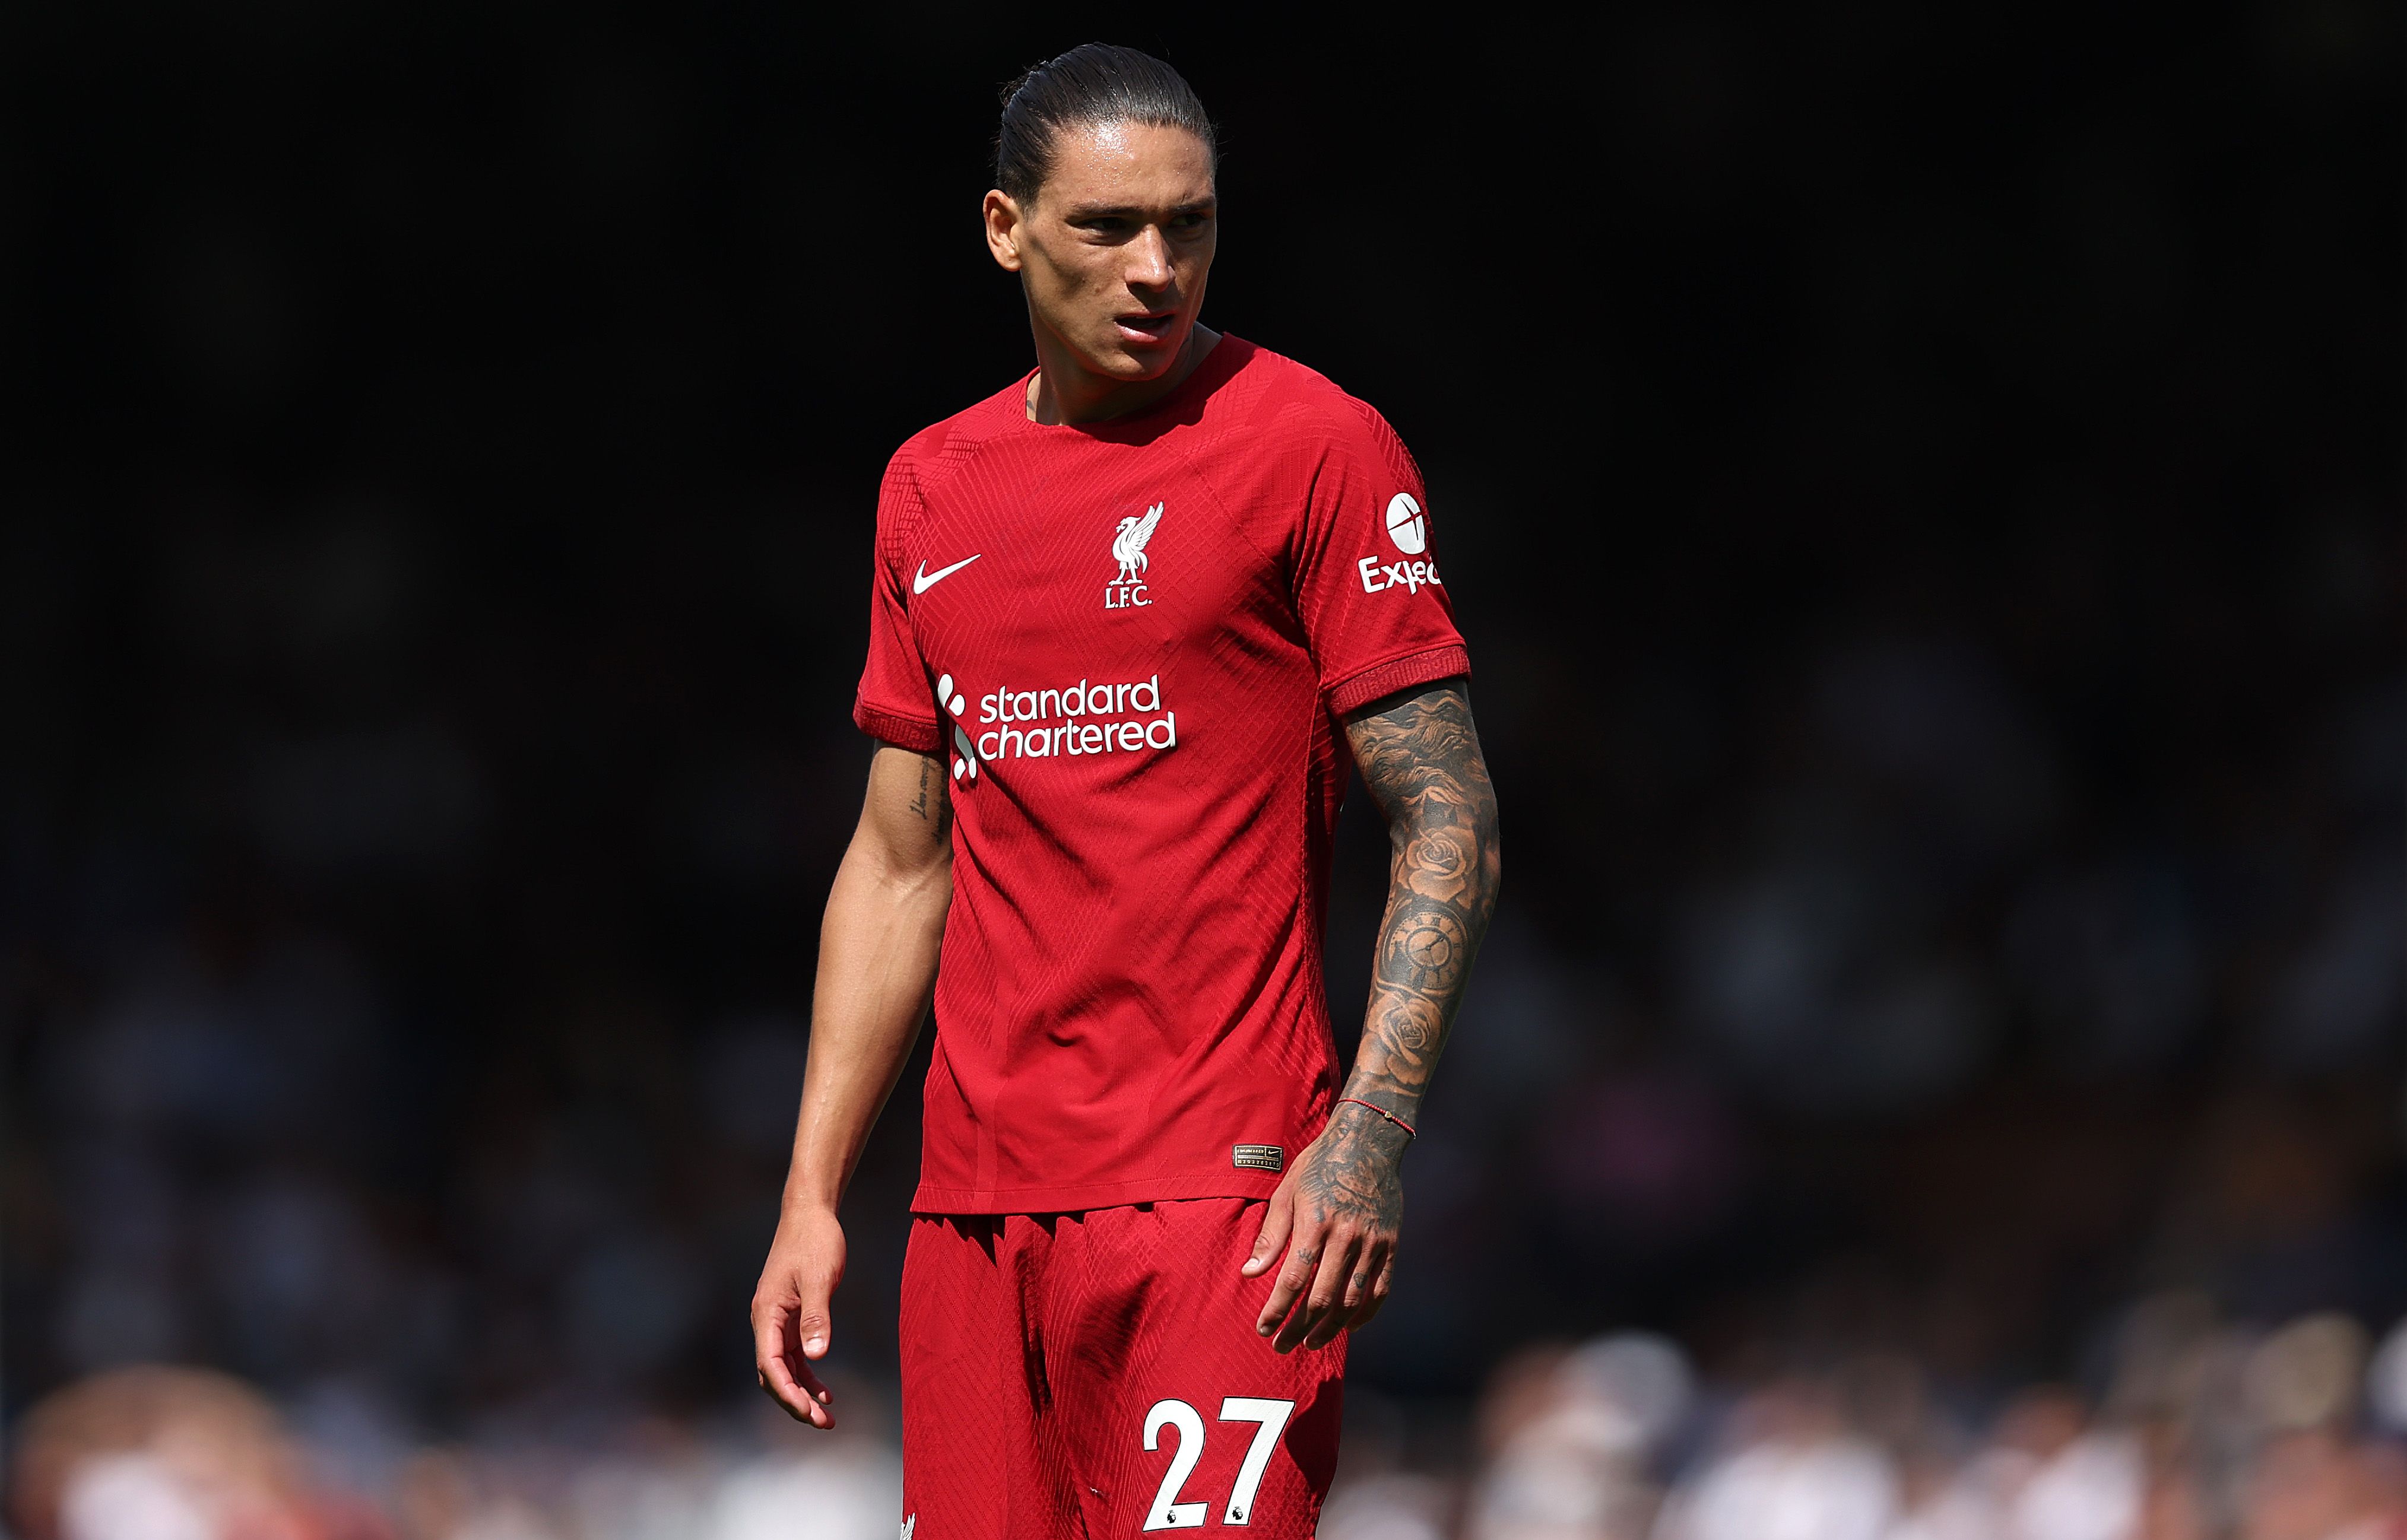 Darwin Nunez of Liverpool during the Premier League match between Fulham FC and Liverpool FC